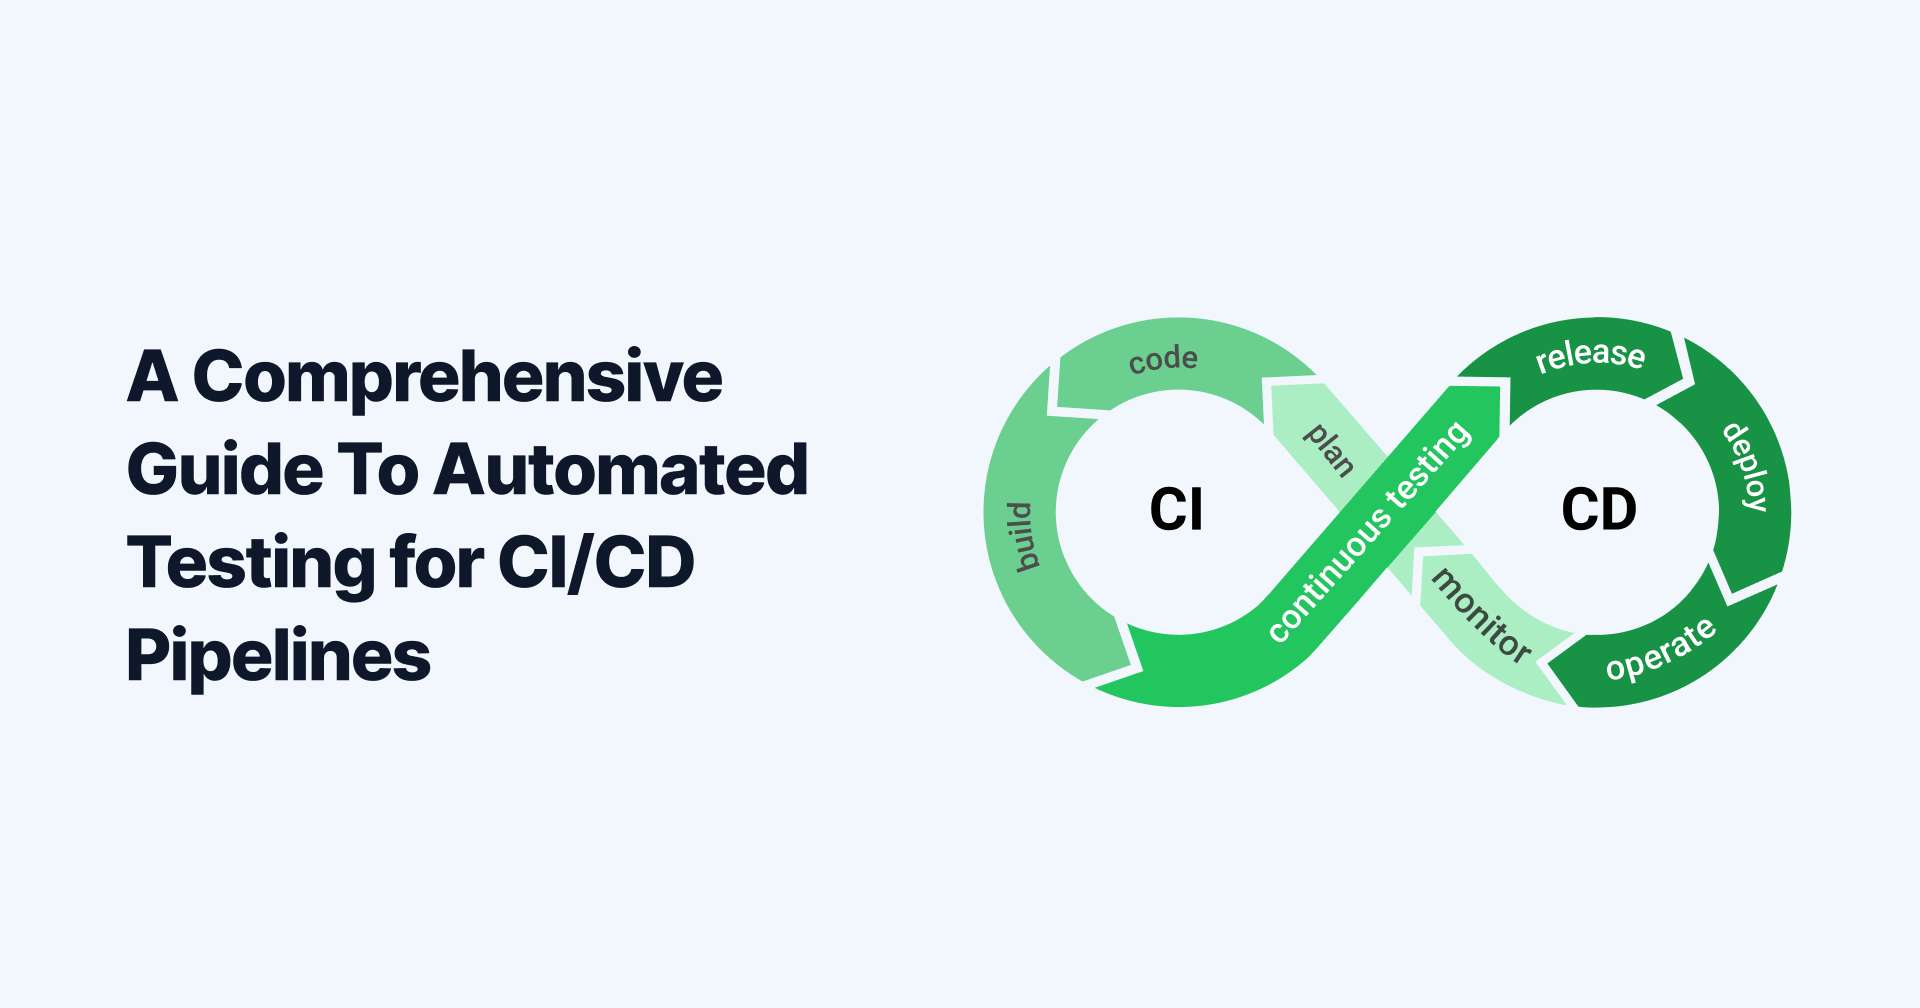 A Comprehensive Guide To Automated Testing for CI/CD Pipelines